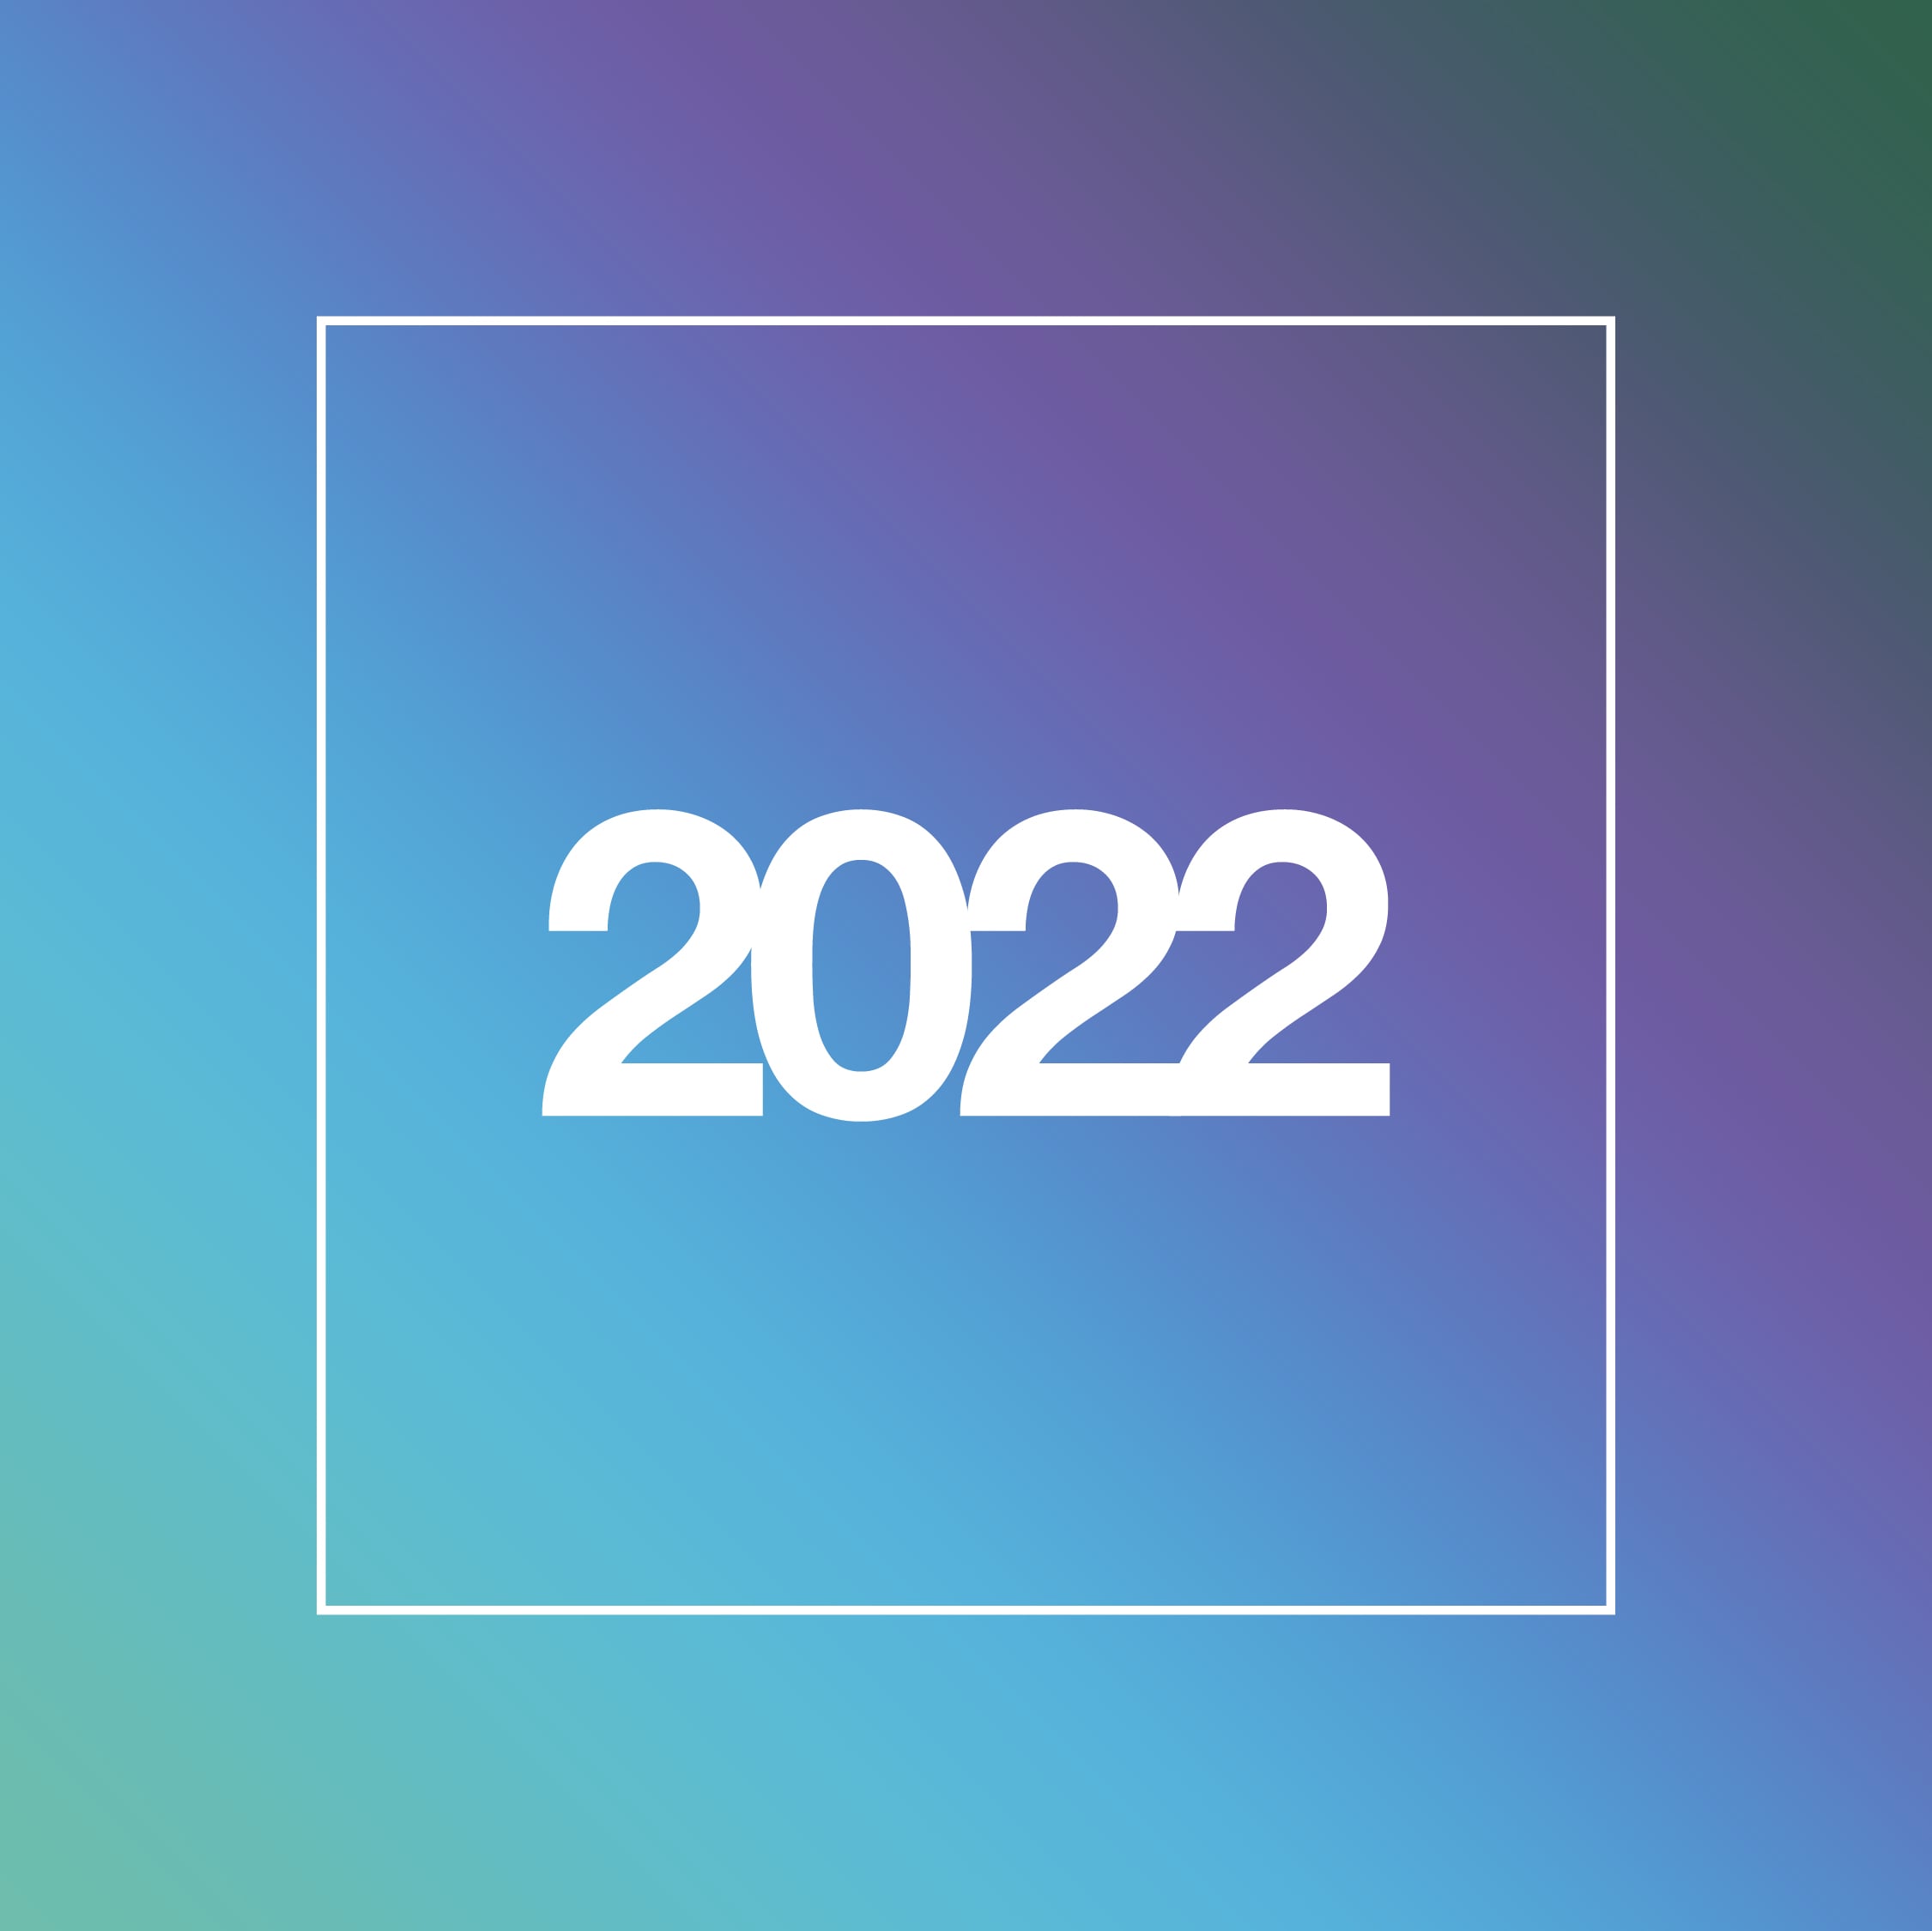 2022 with gradient behind it.